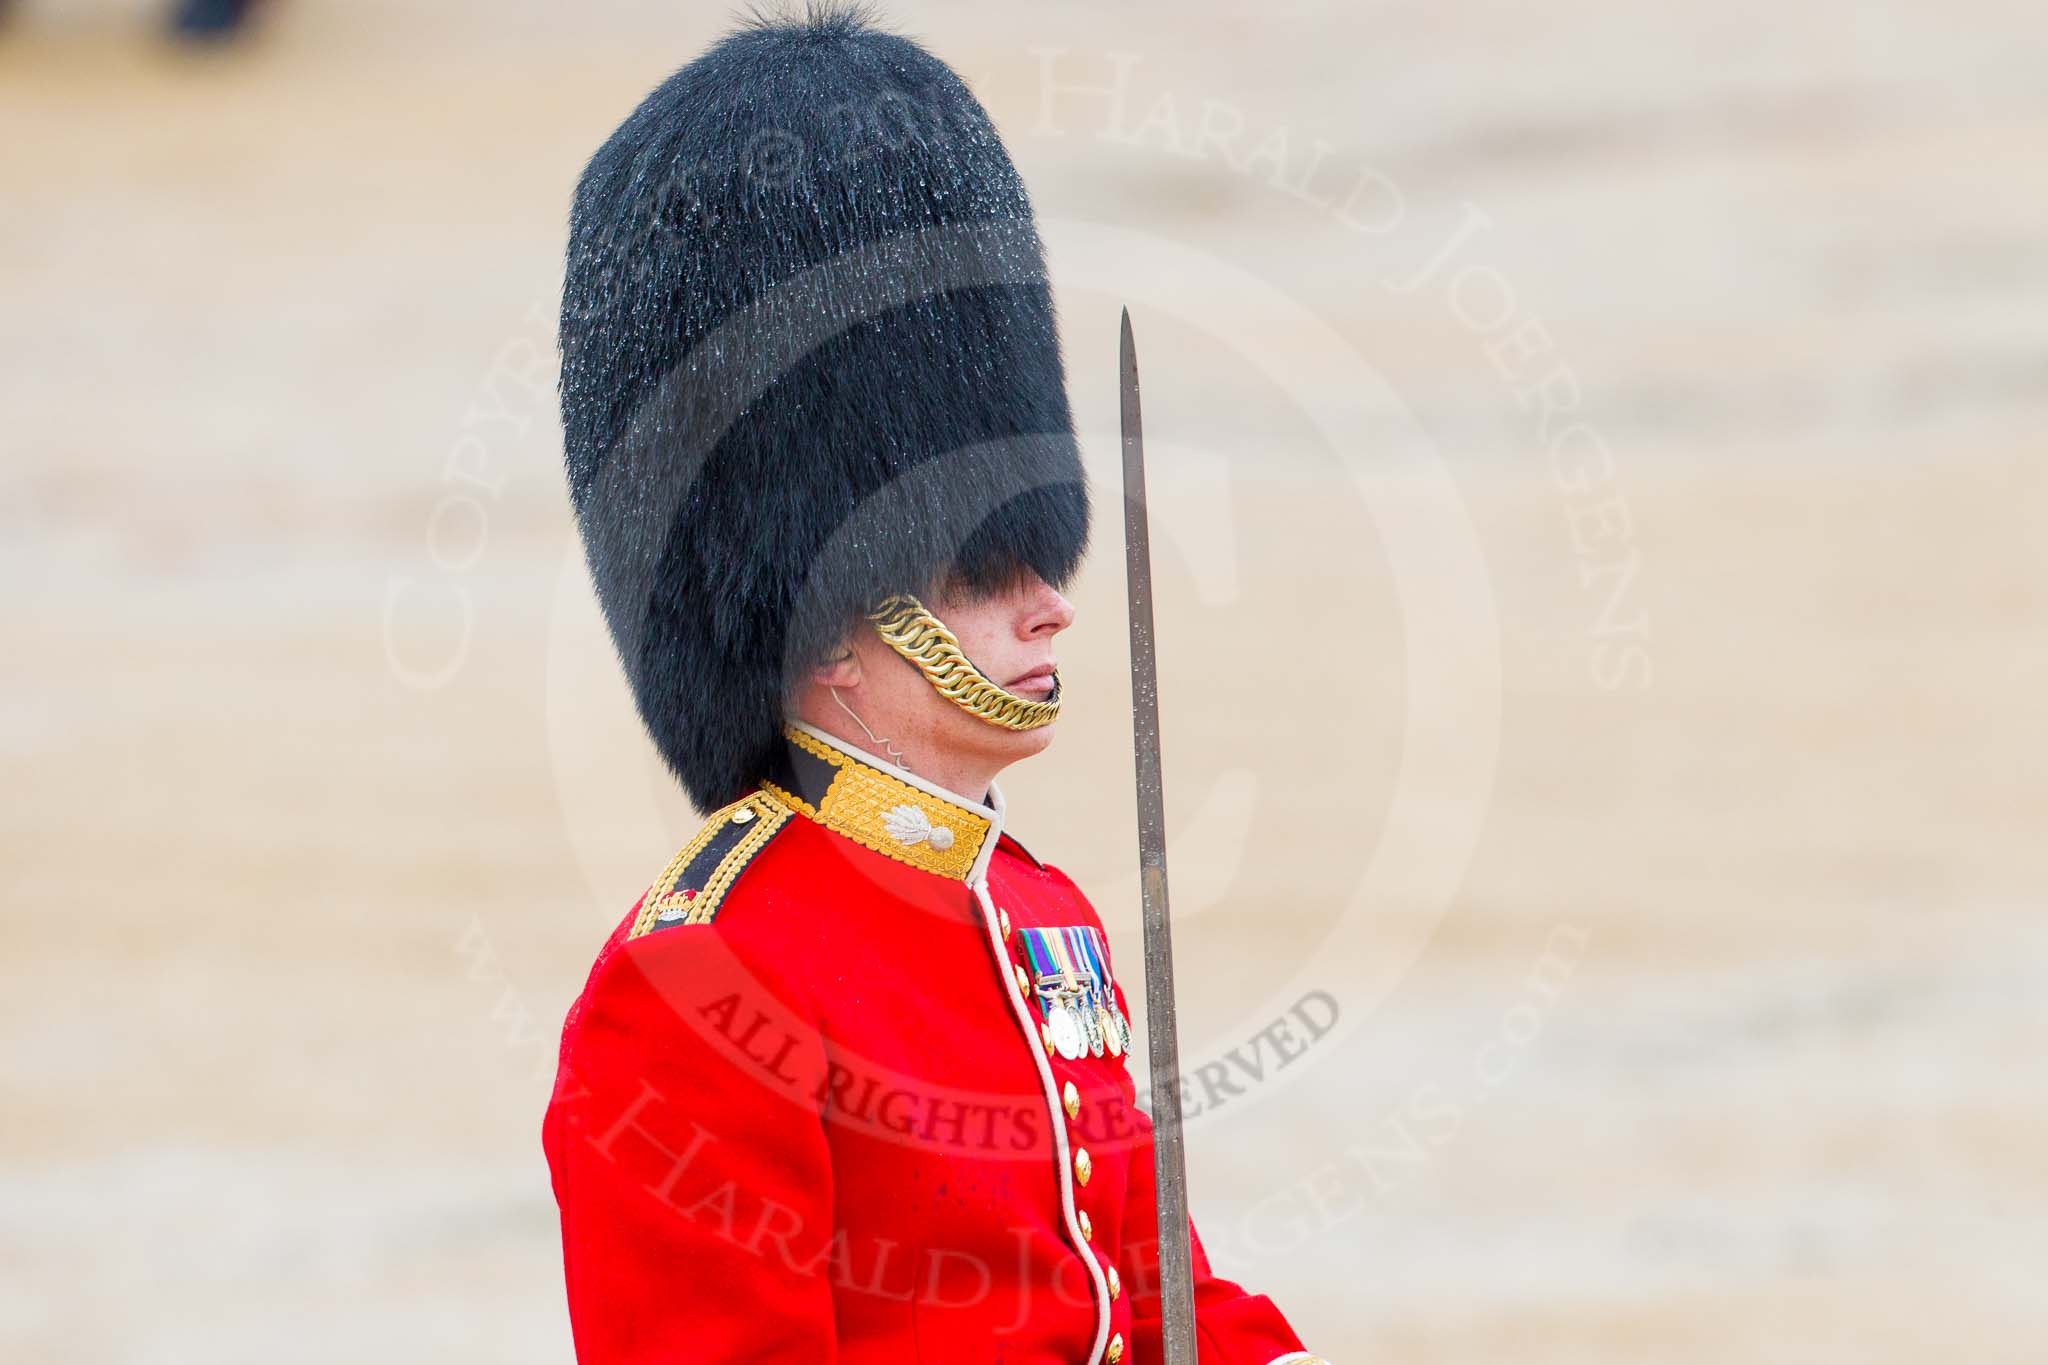 The Colonel's Review 2014.
Horse Guards Parade, Westminster,
London,

United Kingdom,
on 07 June 2014 at 11:34, image #493